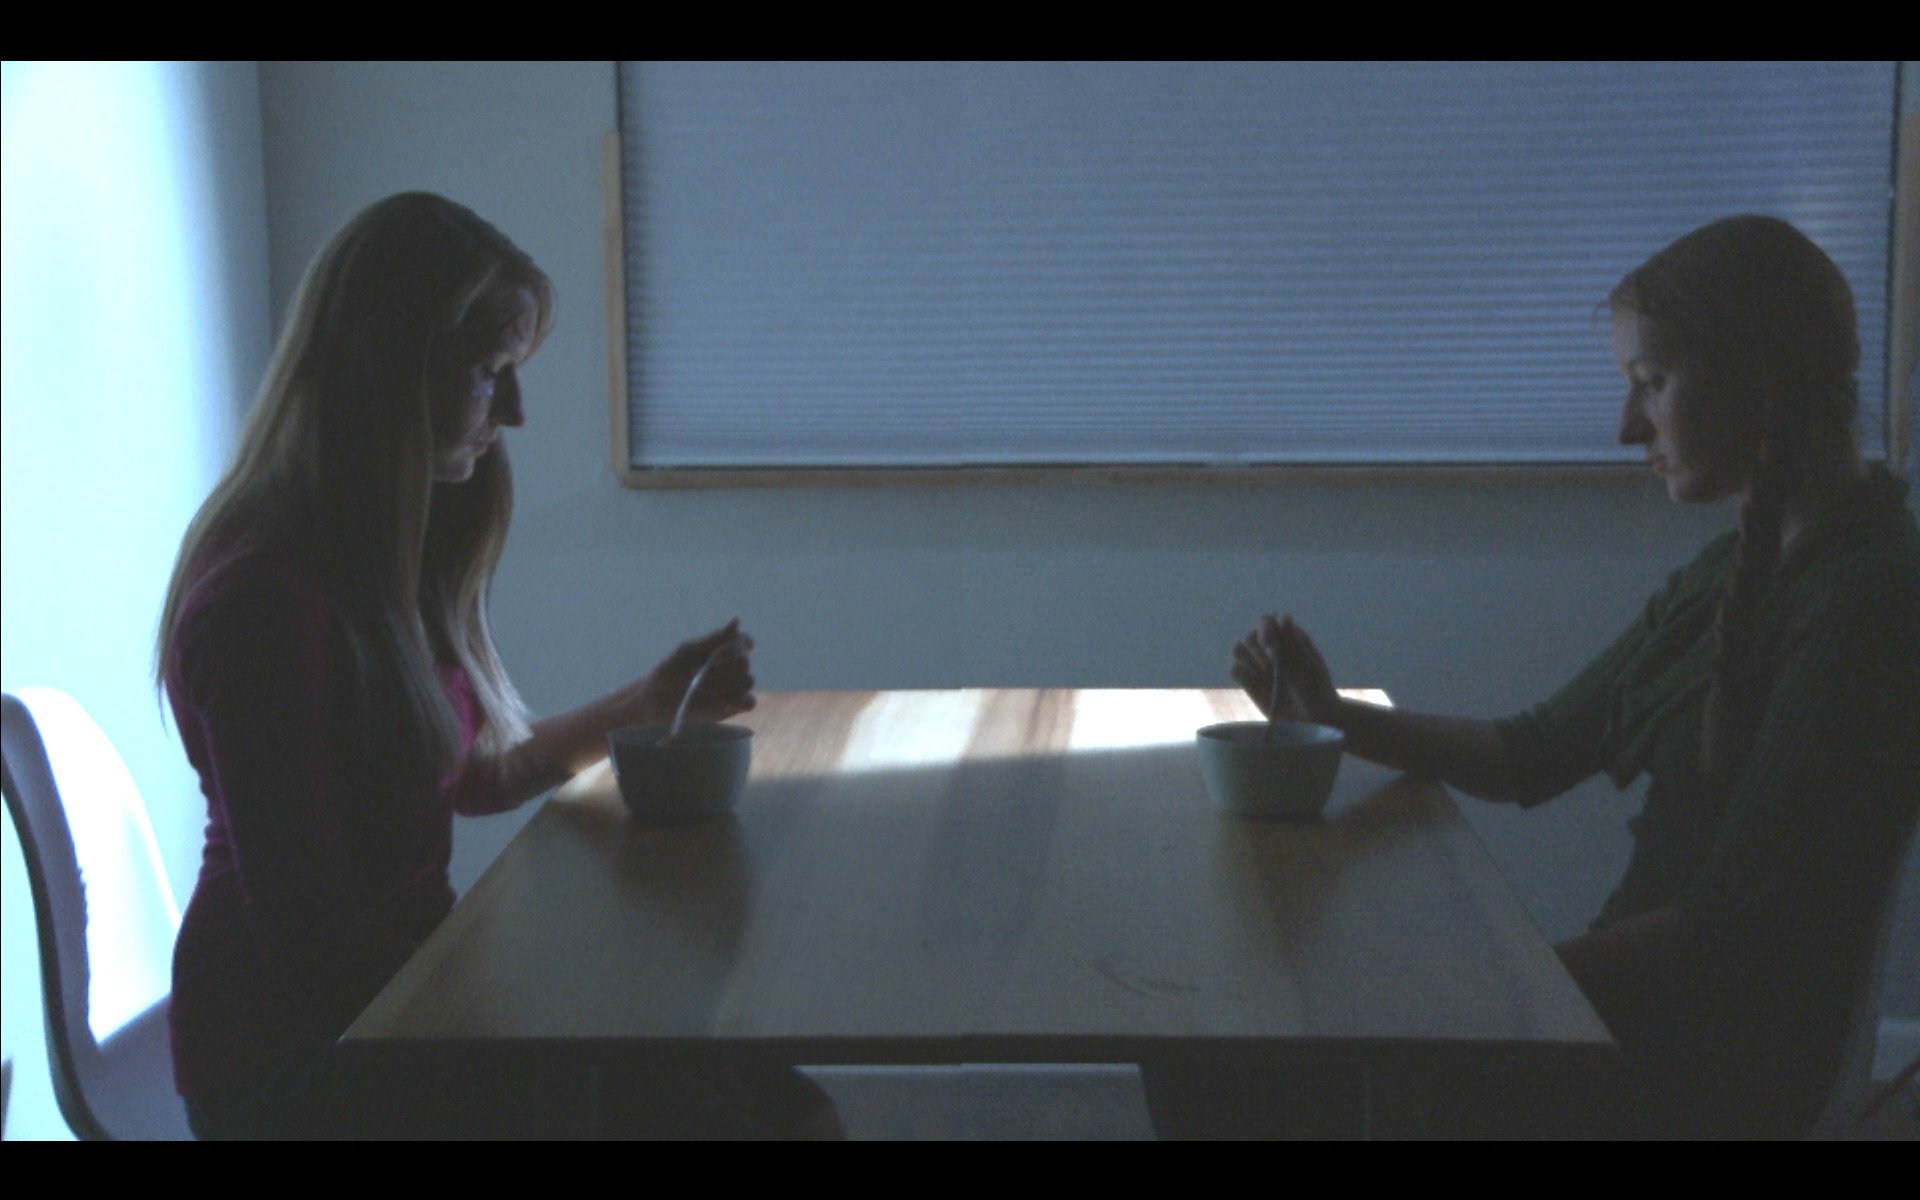 Screenshot from Salt, a short film about the struggling relationship between twin sisters, both played by Sarah J Eagen